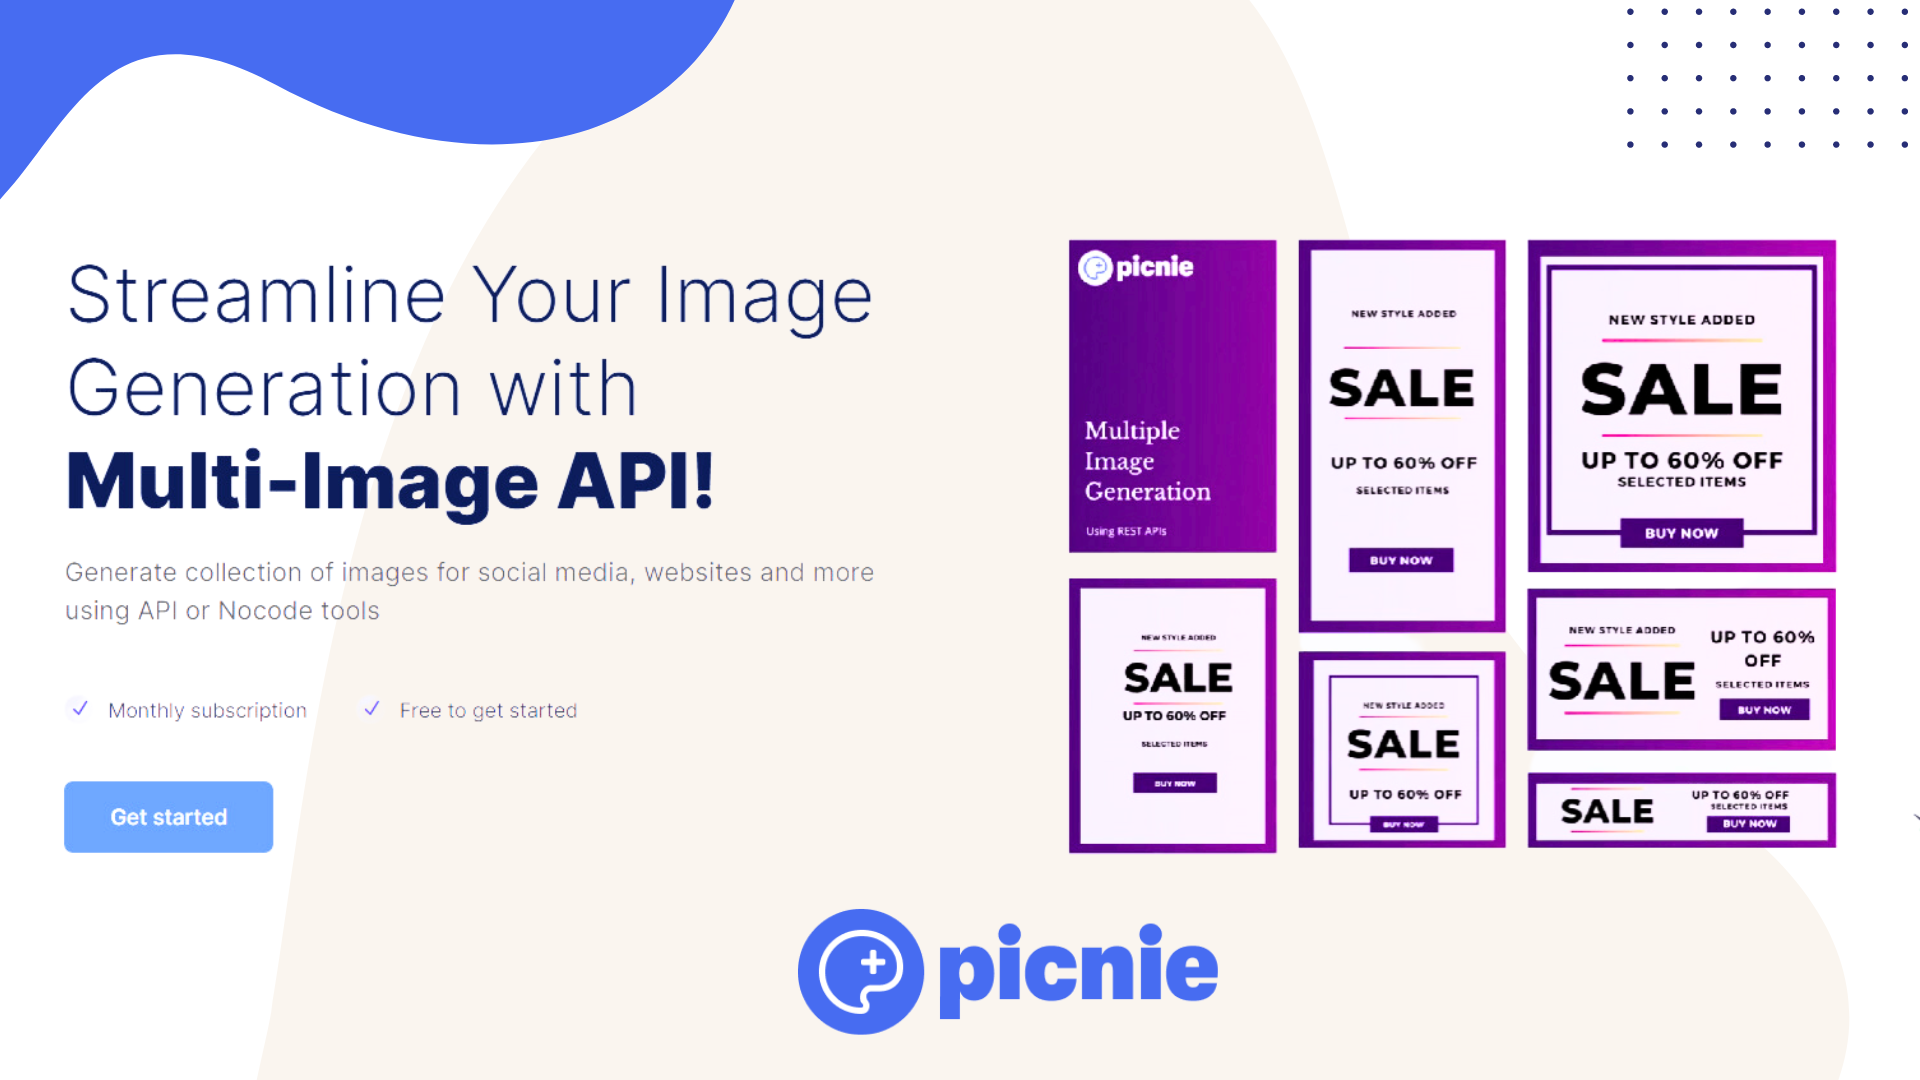 Generate collection of images for social media, websites and more using API or No-code tools.